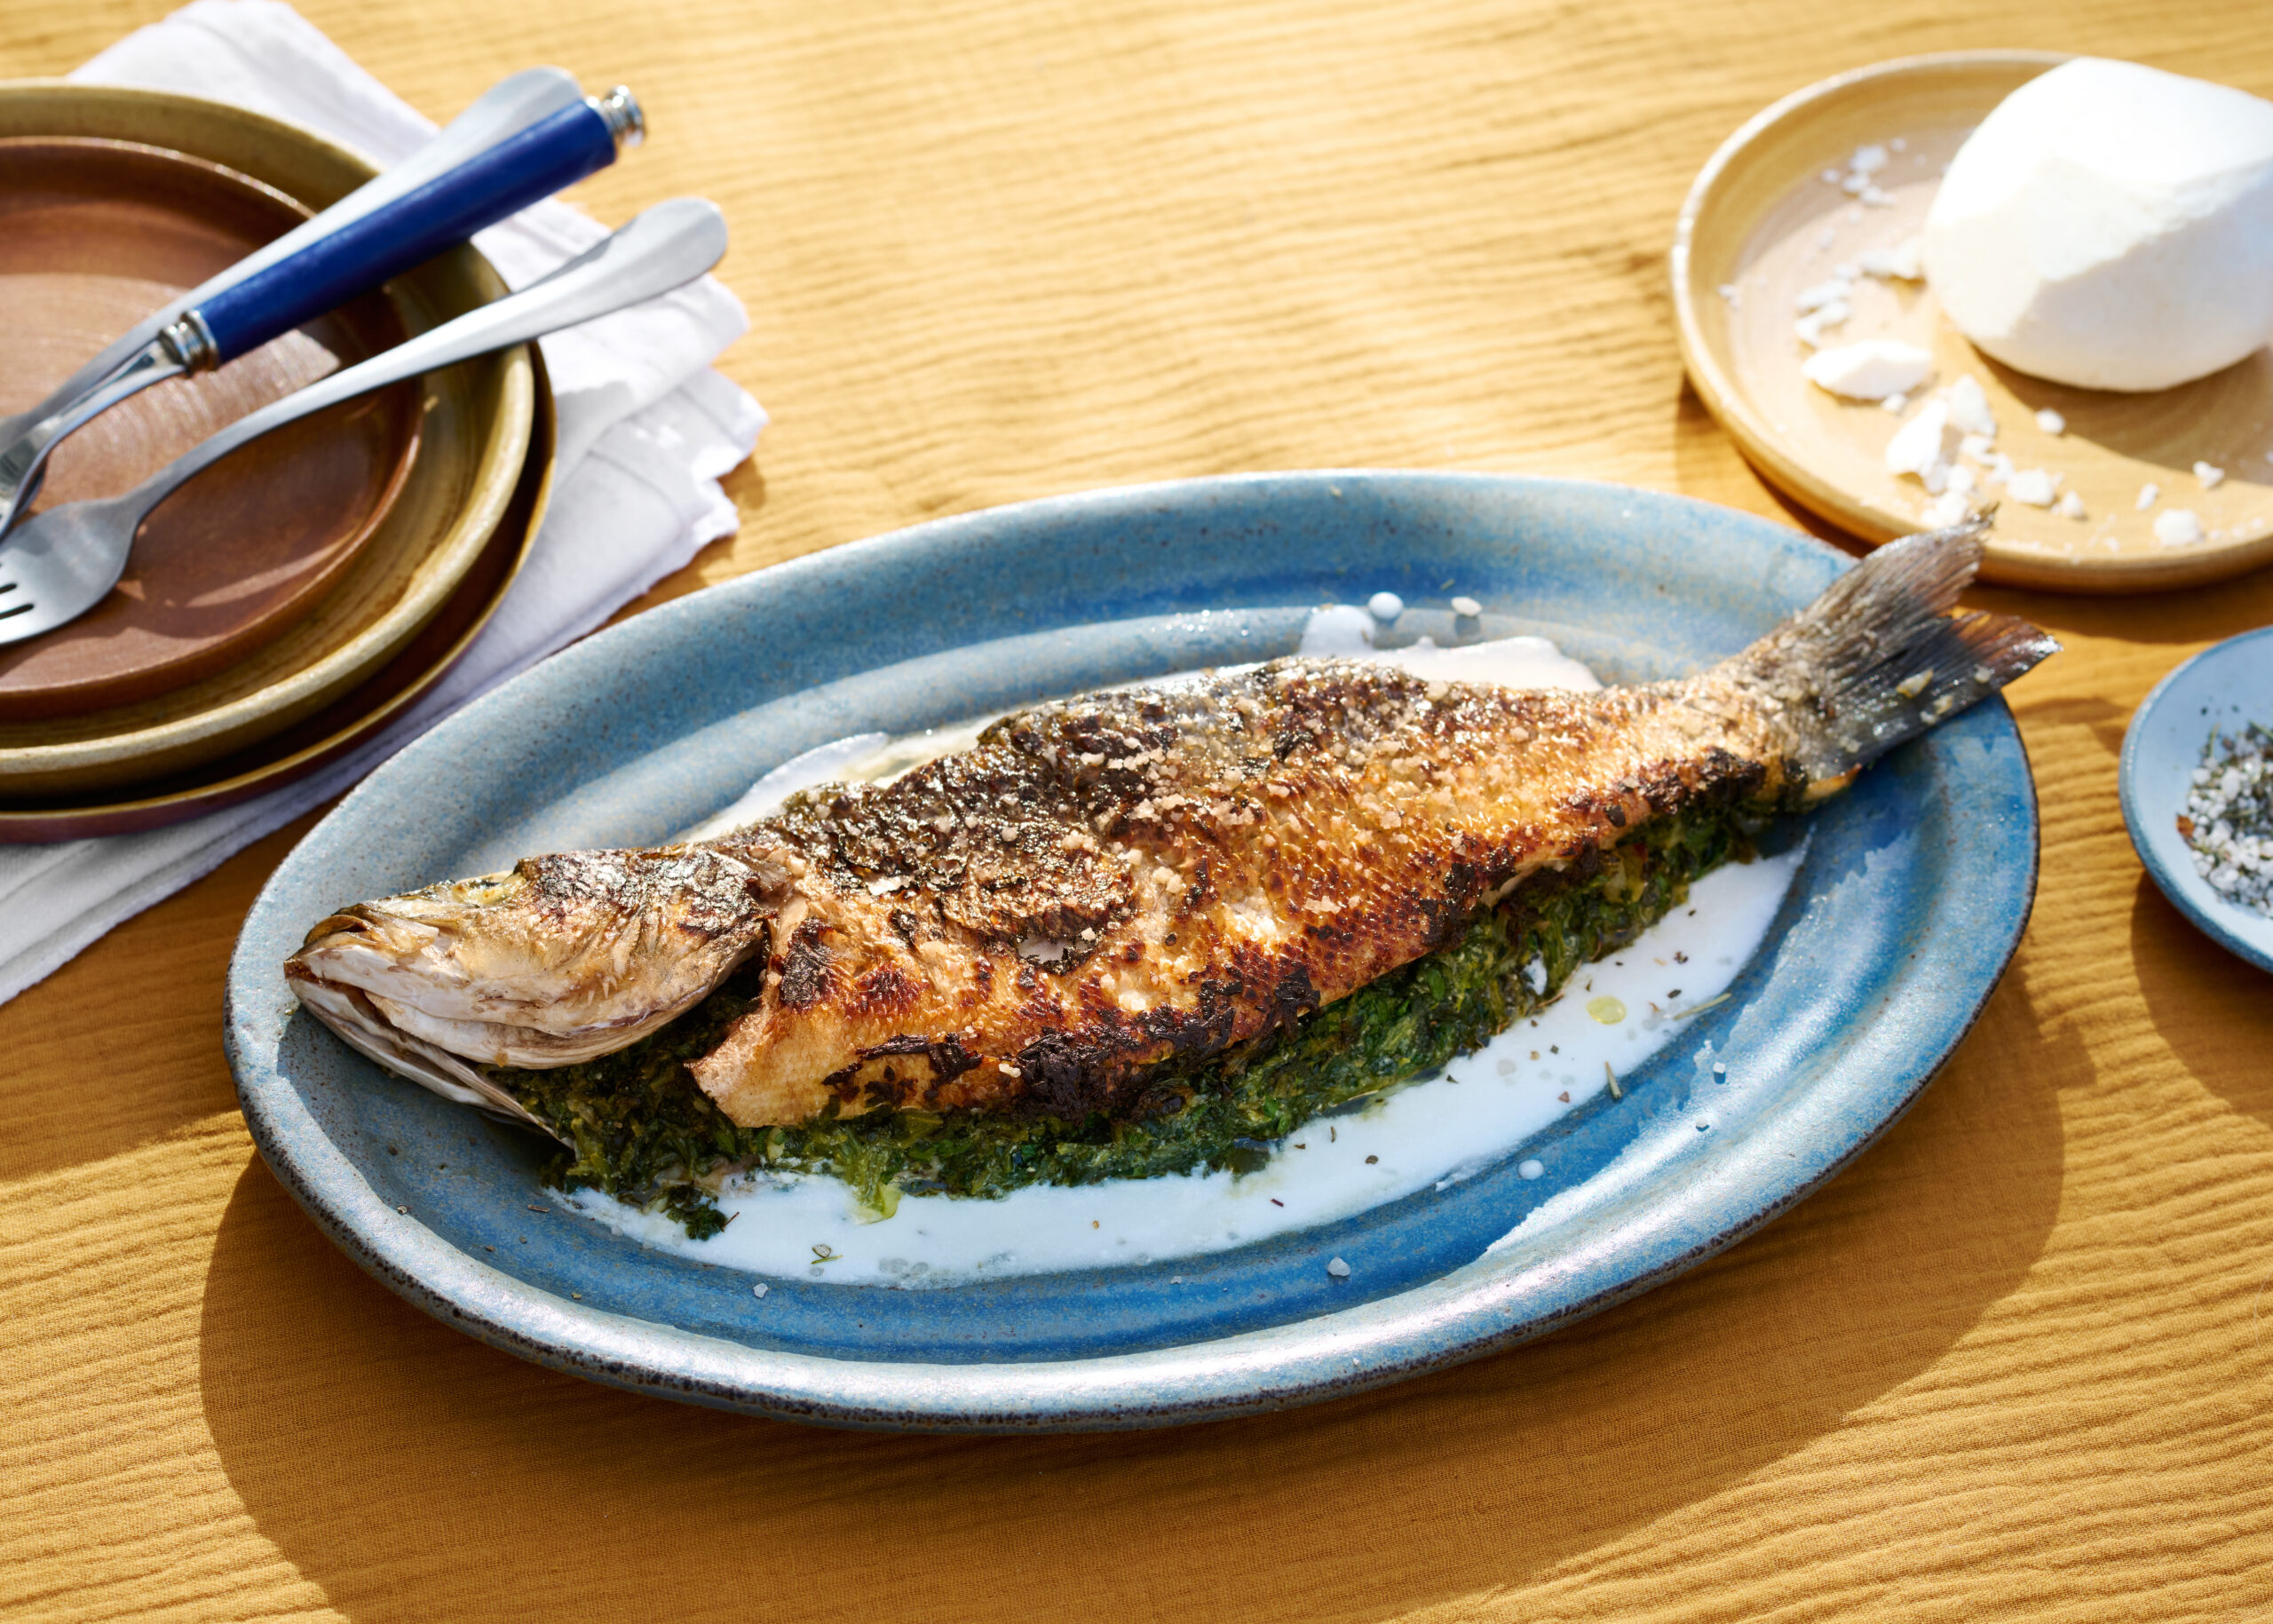 Whole roasted fish stuffed with herbs served on blue plate with yogurt sauce